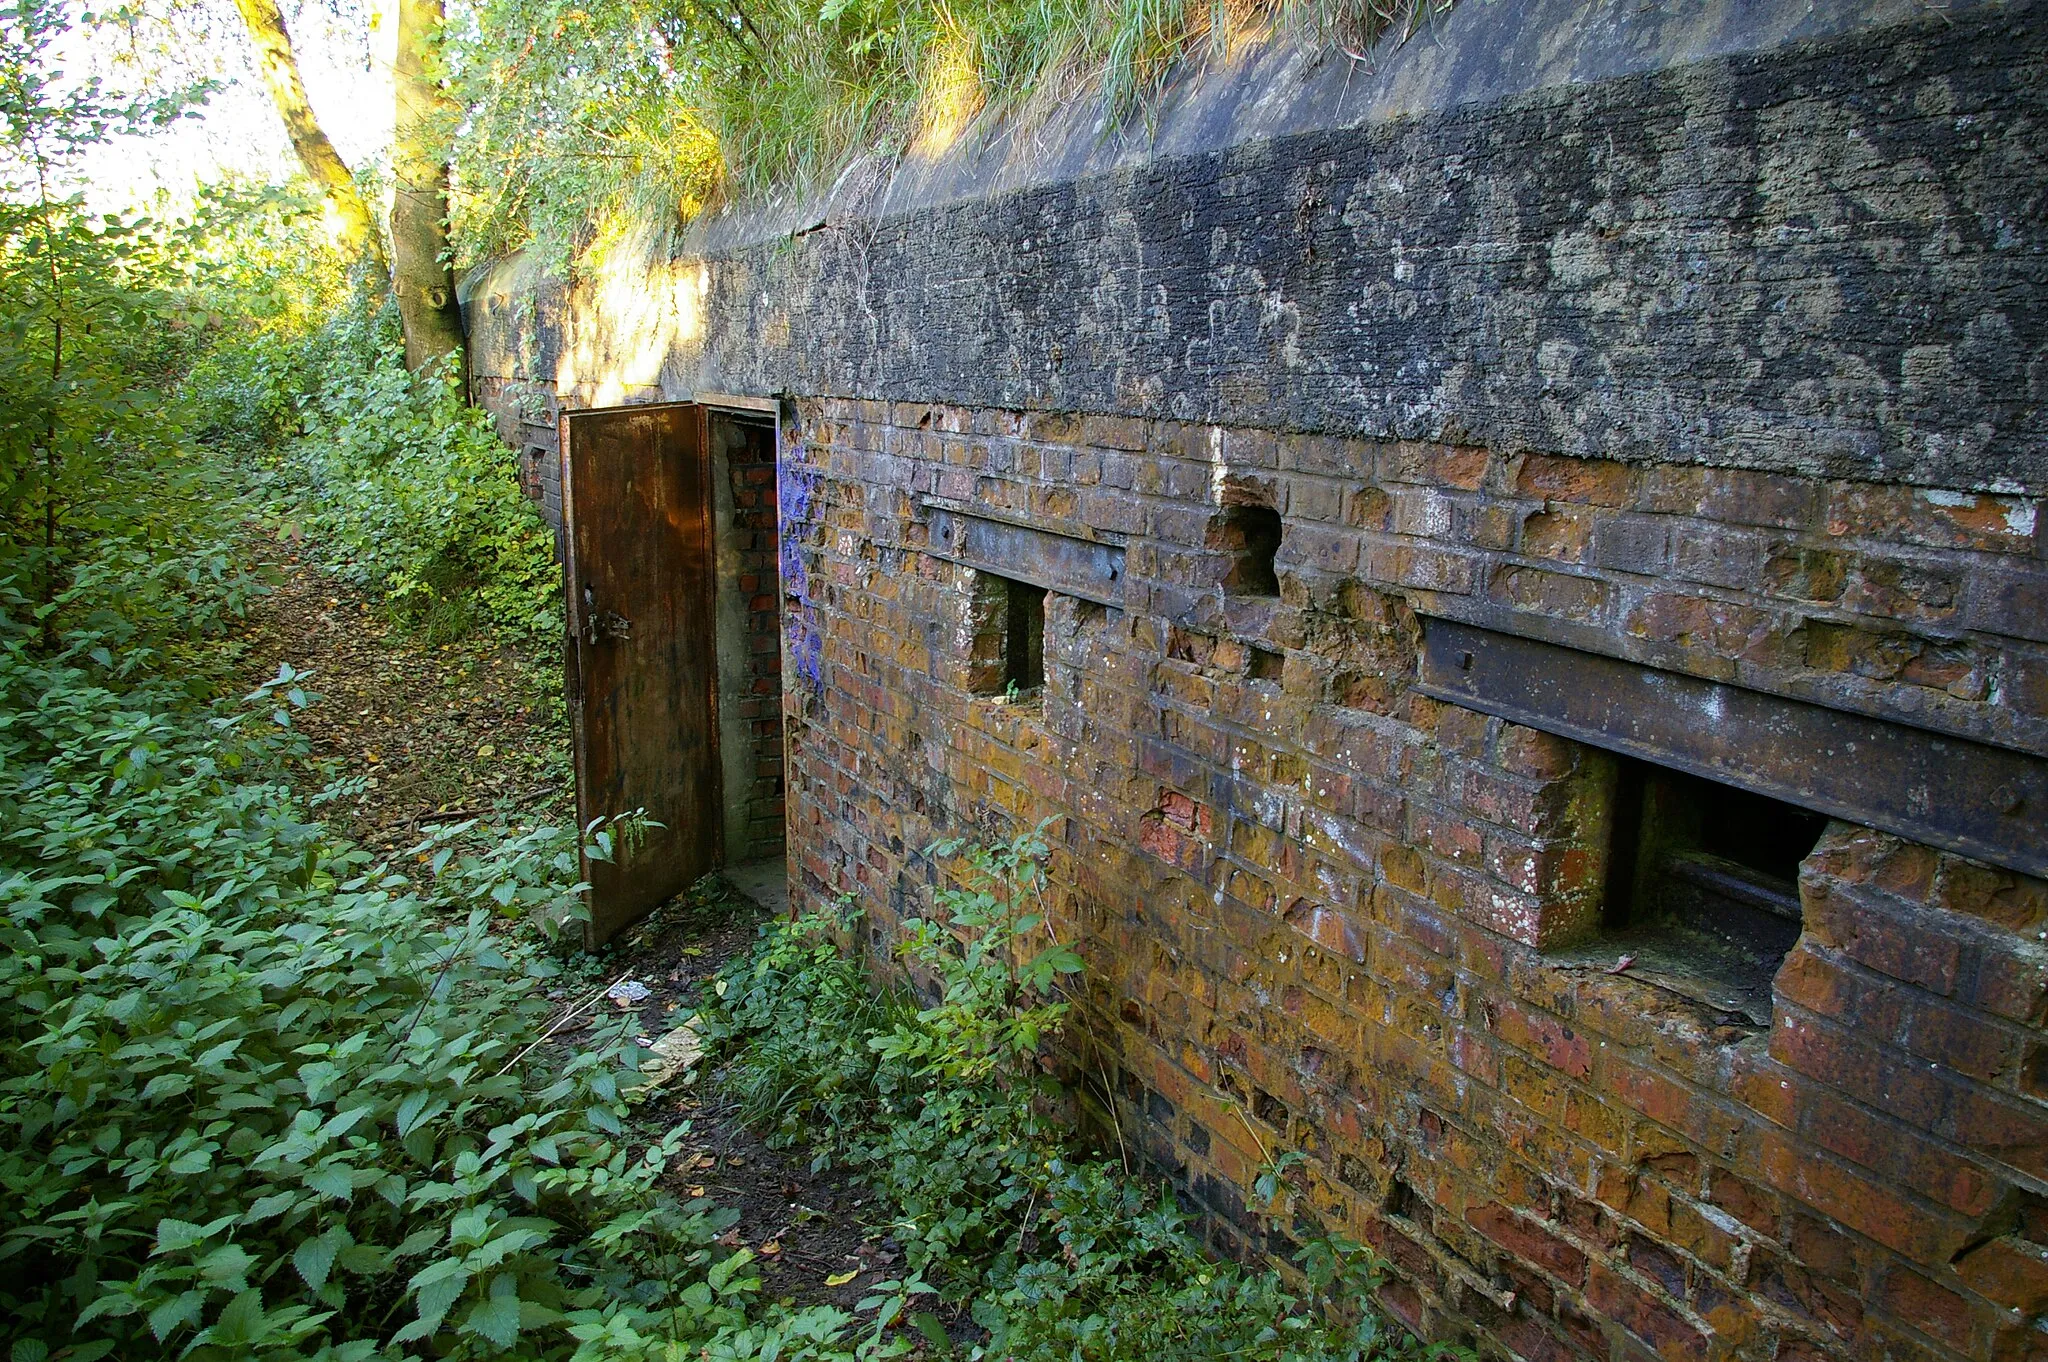 Photo showing: Infantry base 58 in the Muthenhölzle near Neu-Ulm, north of Ludwigsfeld. Built in 1914, abandoned and forgotten, it survived the demolition of the bases by the allied forces in 1945.